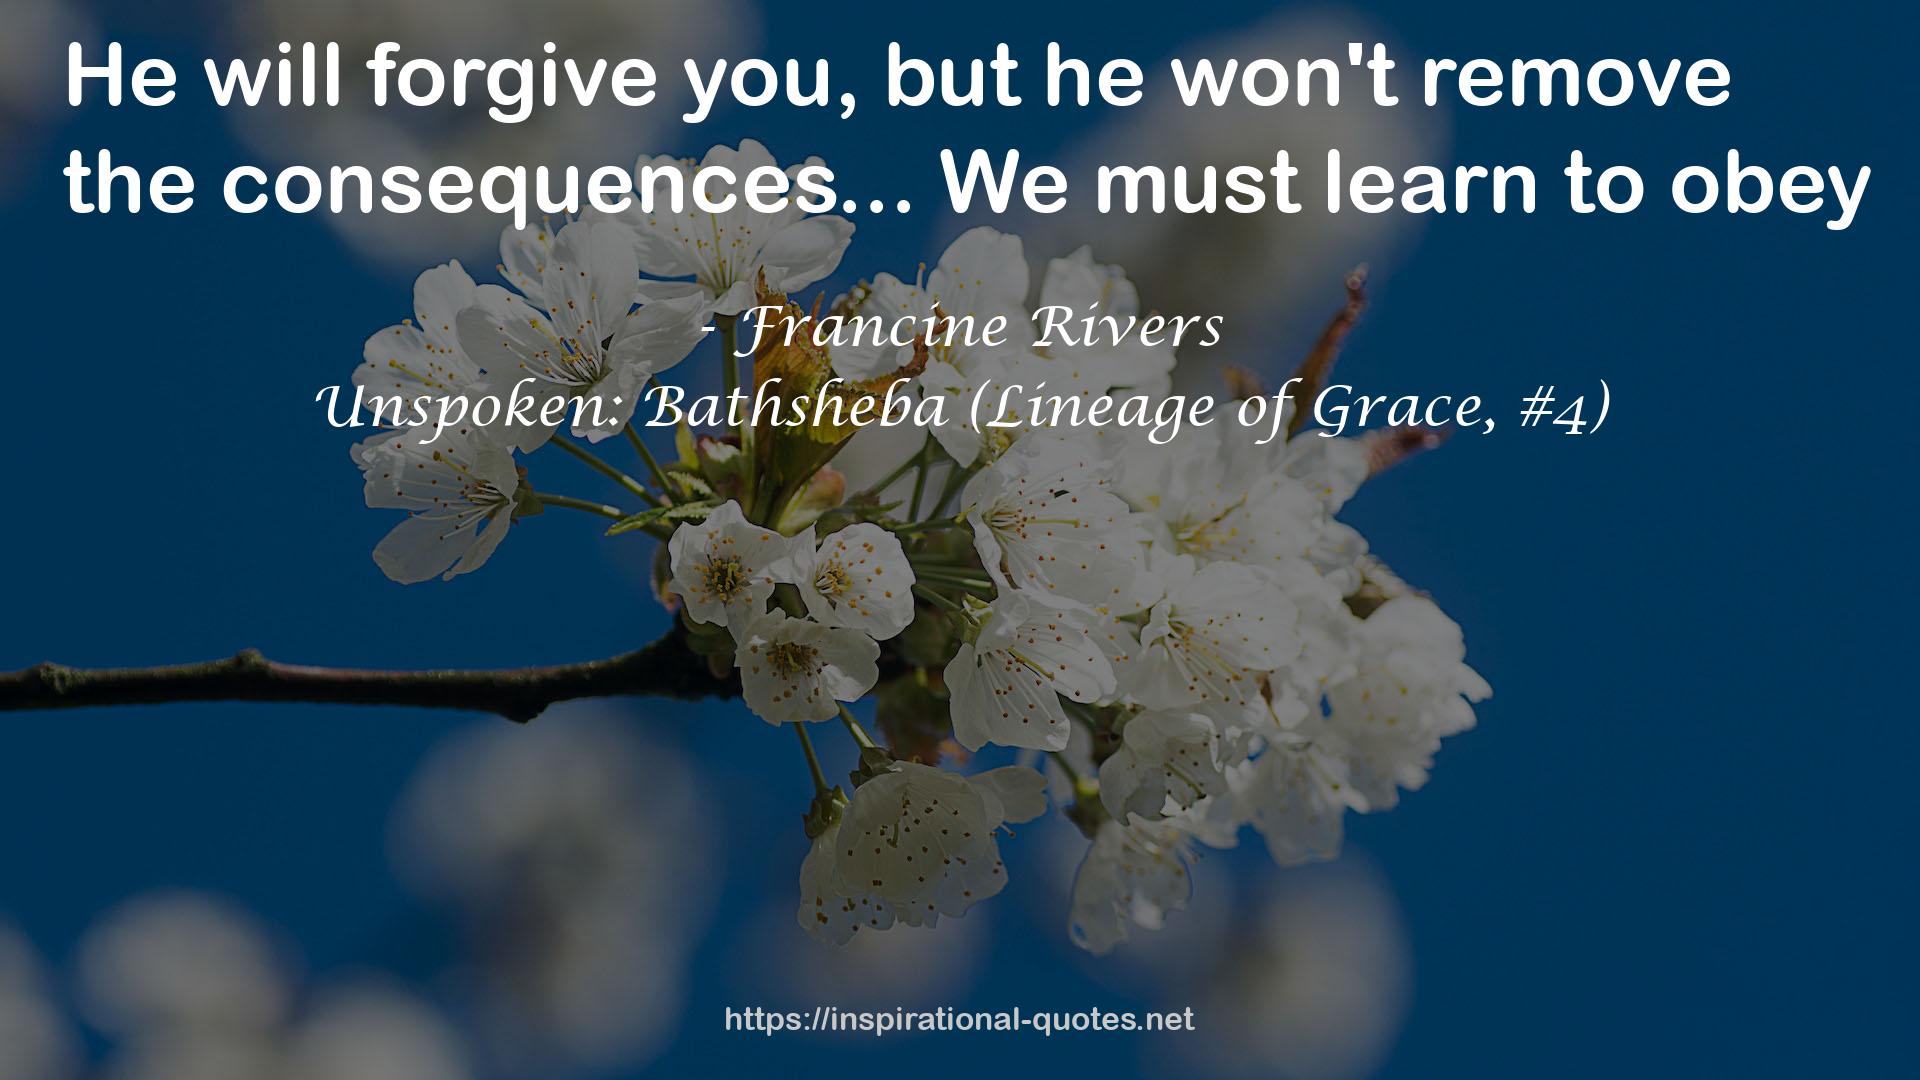 Unspoken: Bathsheba (Lineage of Grace, #4) QUOTES